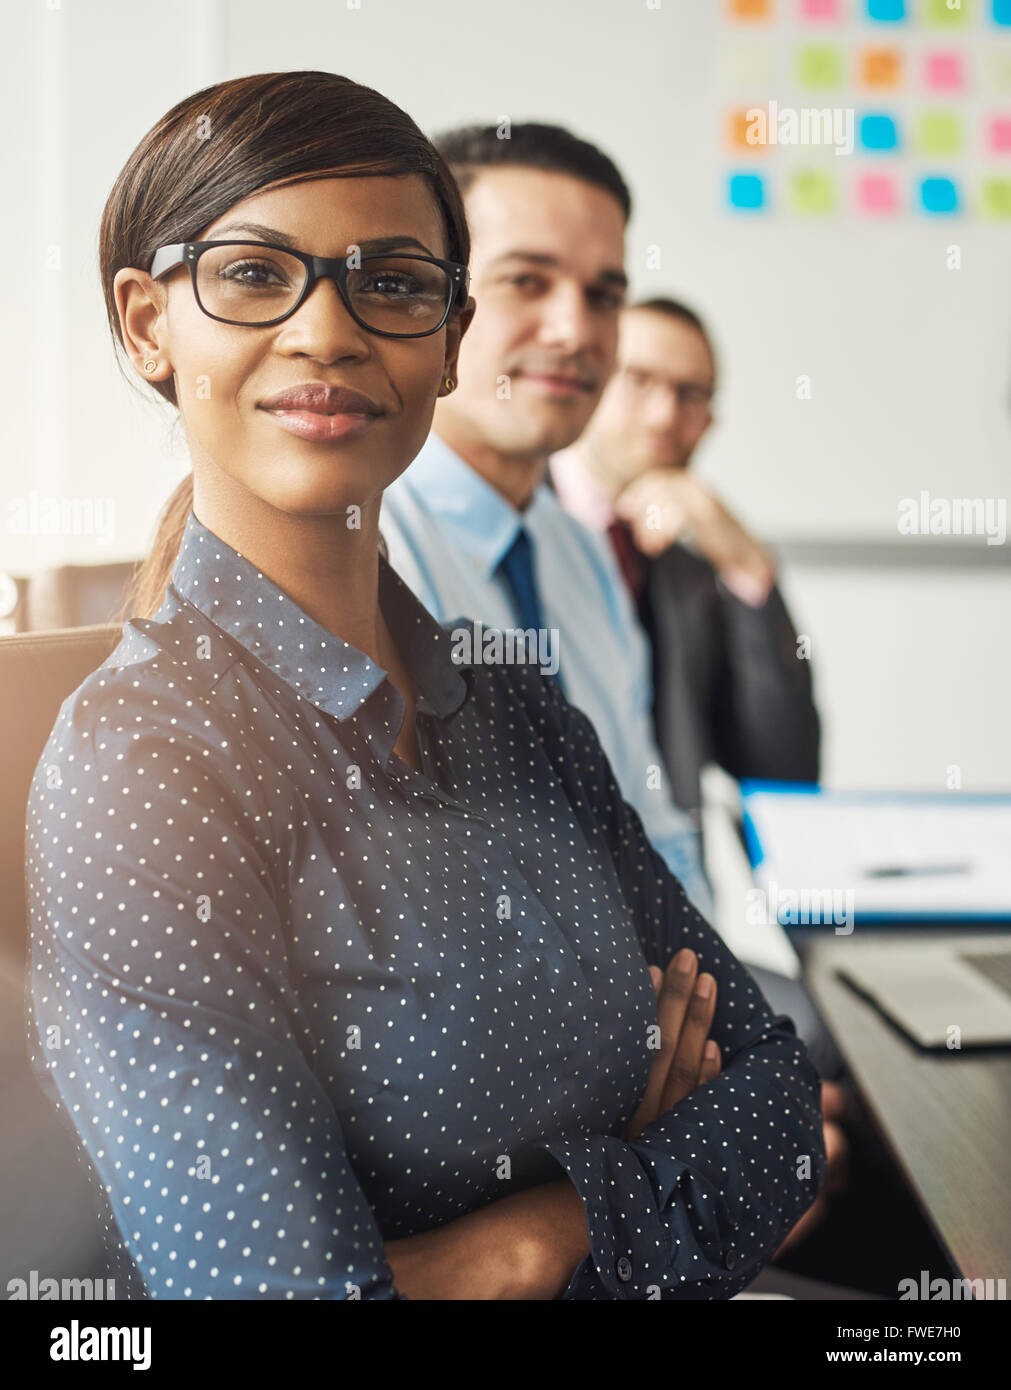 Confident smiling business woman wearing eyeglasses and white polka dotted shirt seated with folded arms beside male co-workers Stock Photo